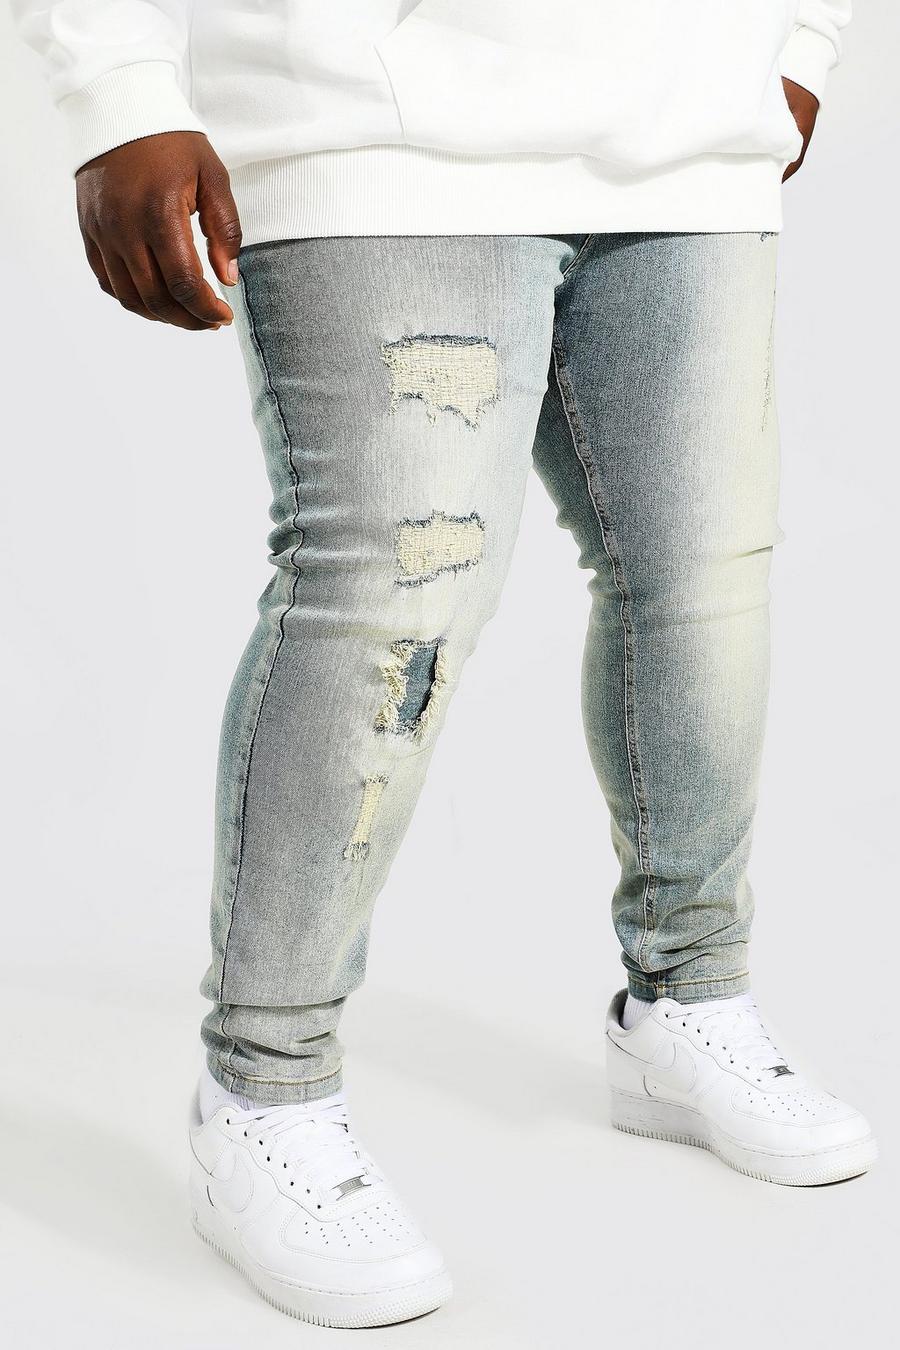 YYDGH On Clearance Men's Ripped Distressed Destroyed Slim Fit Straight Leg Denim  Jeans(Dark Blue,XL) 